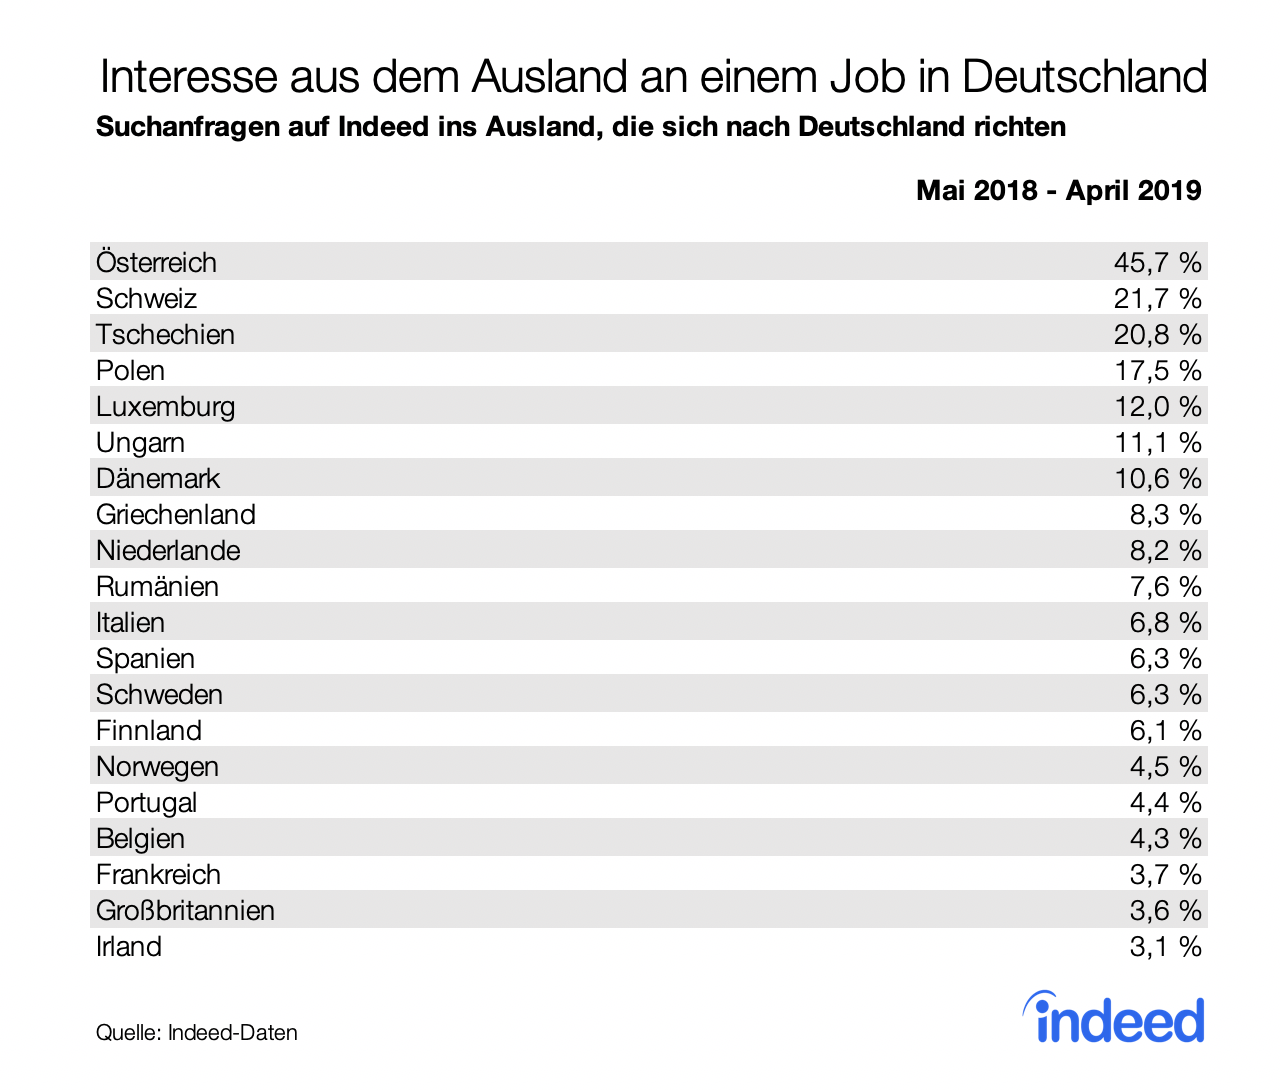 Interest from abroad in a job in Germany led by Austria, Switzerland and the Czech Republic